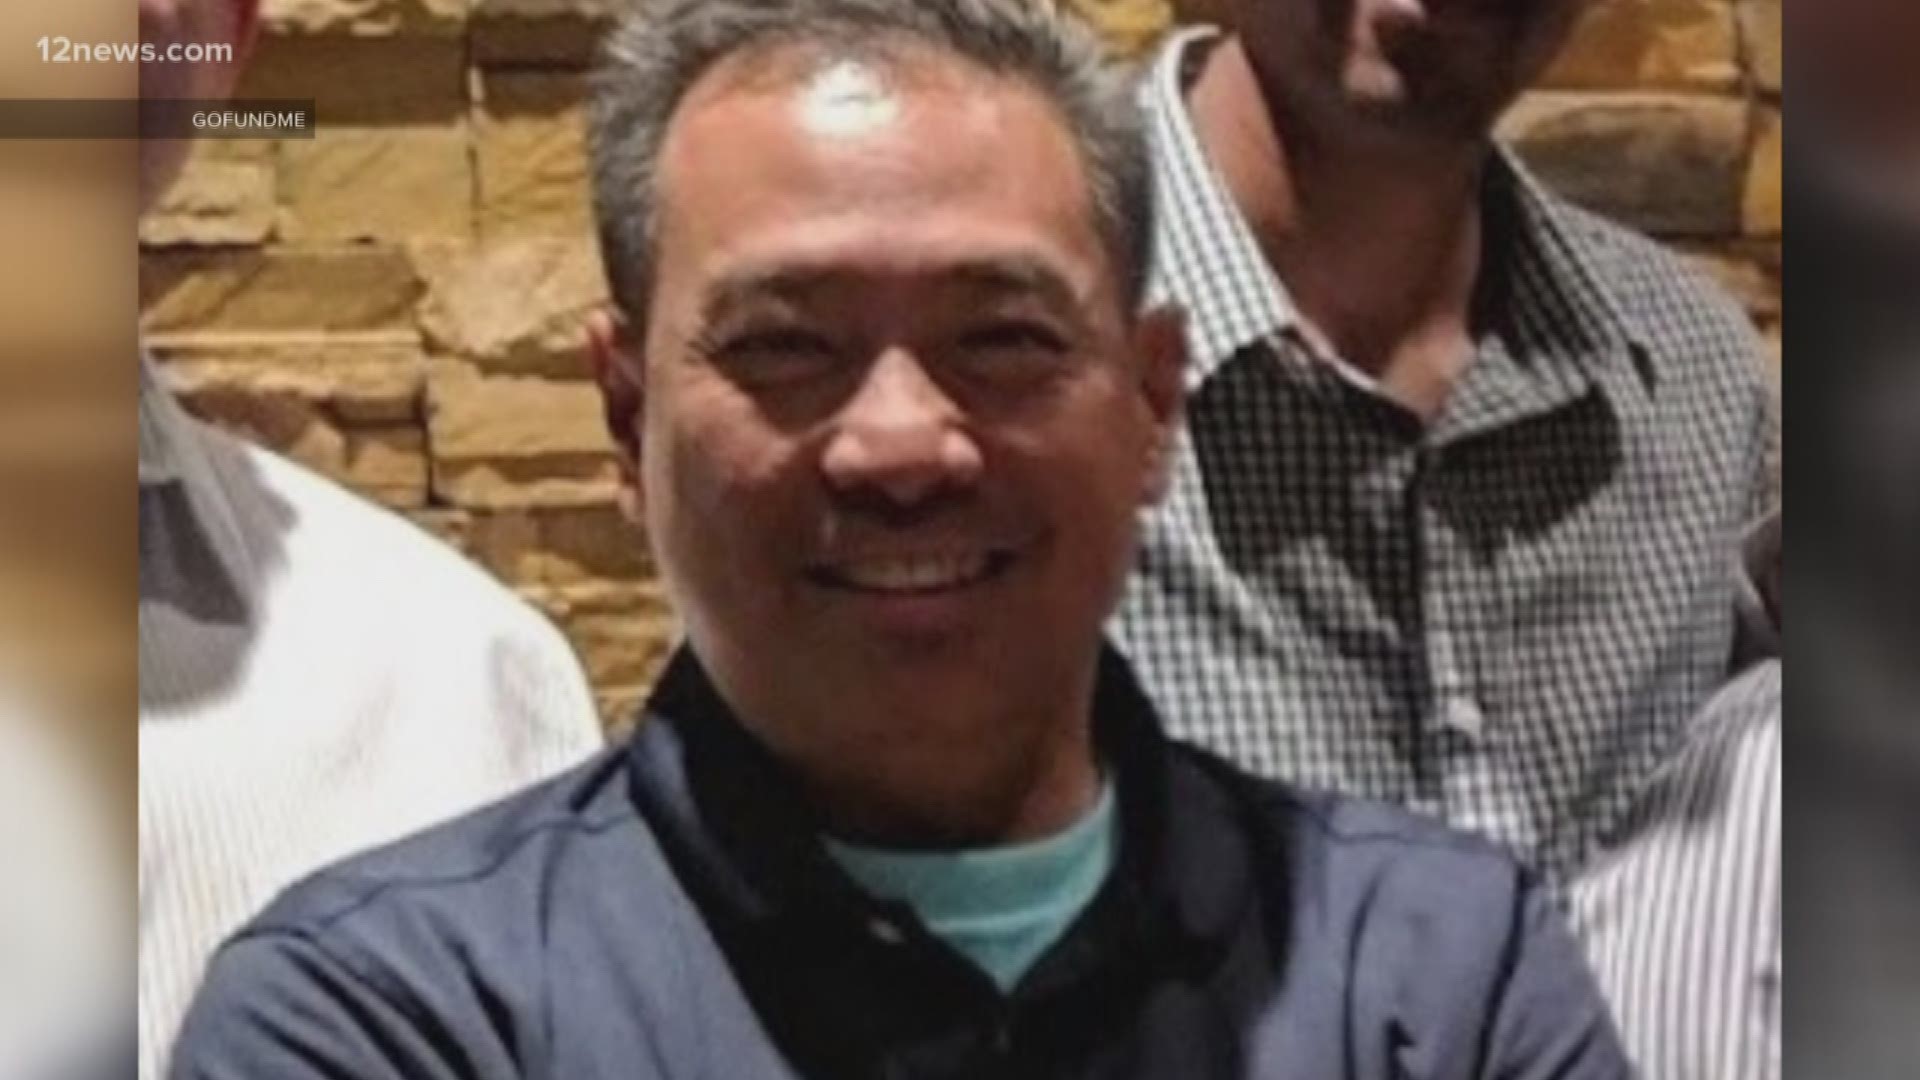 51-year-old Gary Gaytano worked for an insurance company in Glendale, he was married and had three kids. On a weekend trip to Fossil Creek with his family, Gary's son started to struggle in the water. Gary lost his life while trying to save his son from the water.